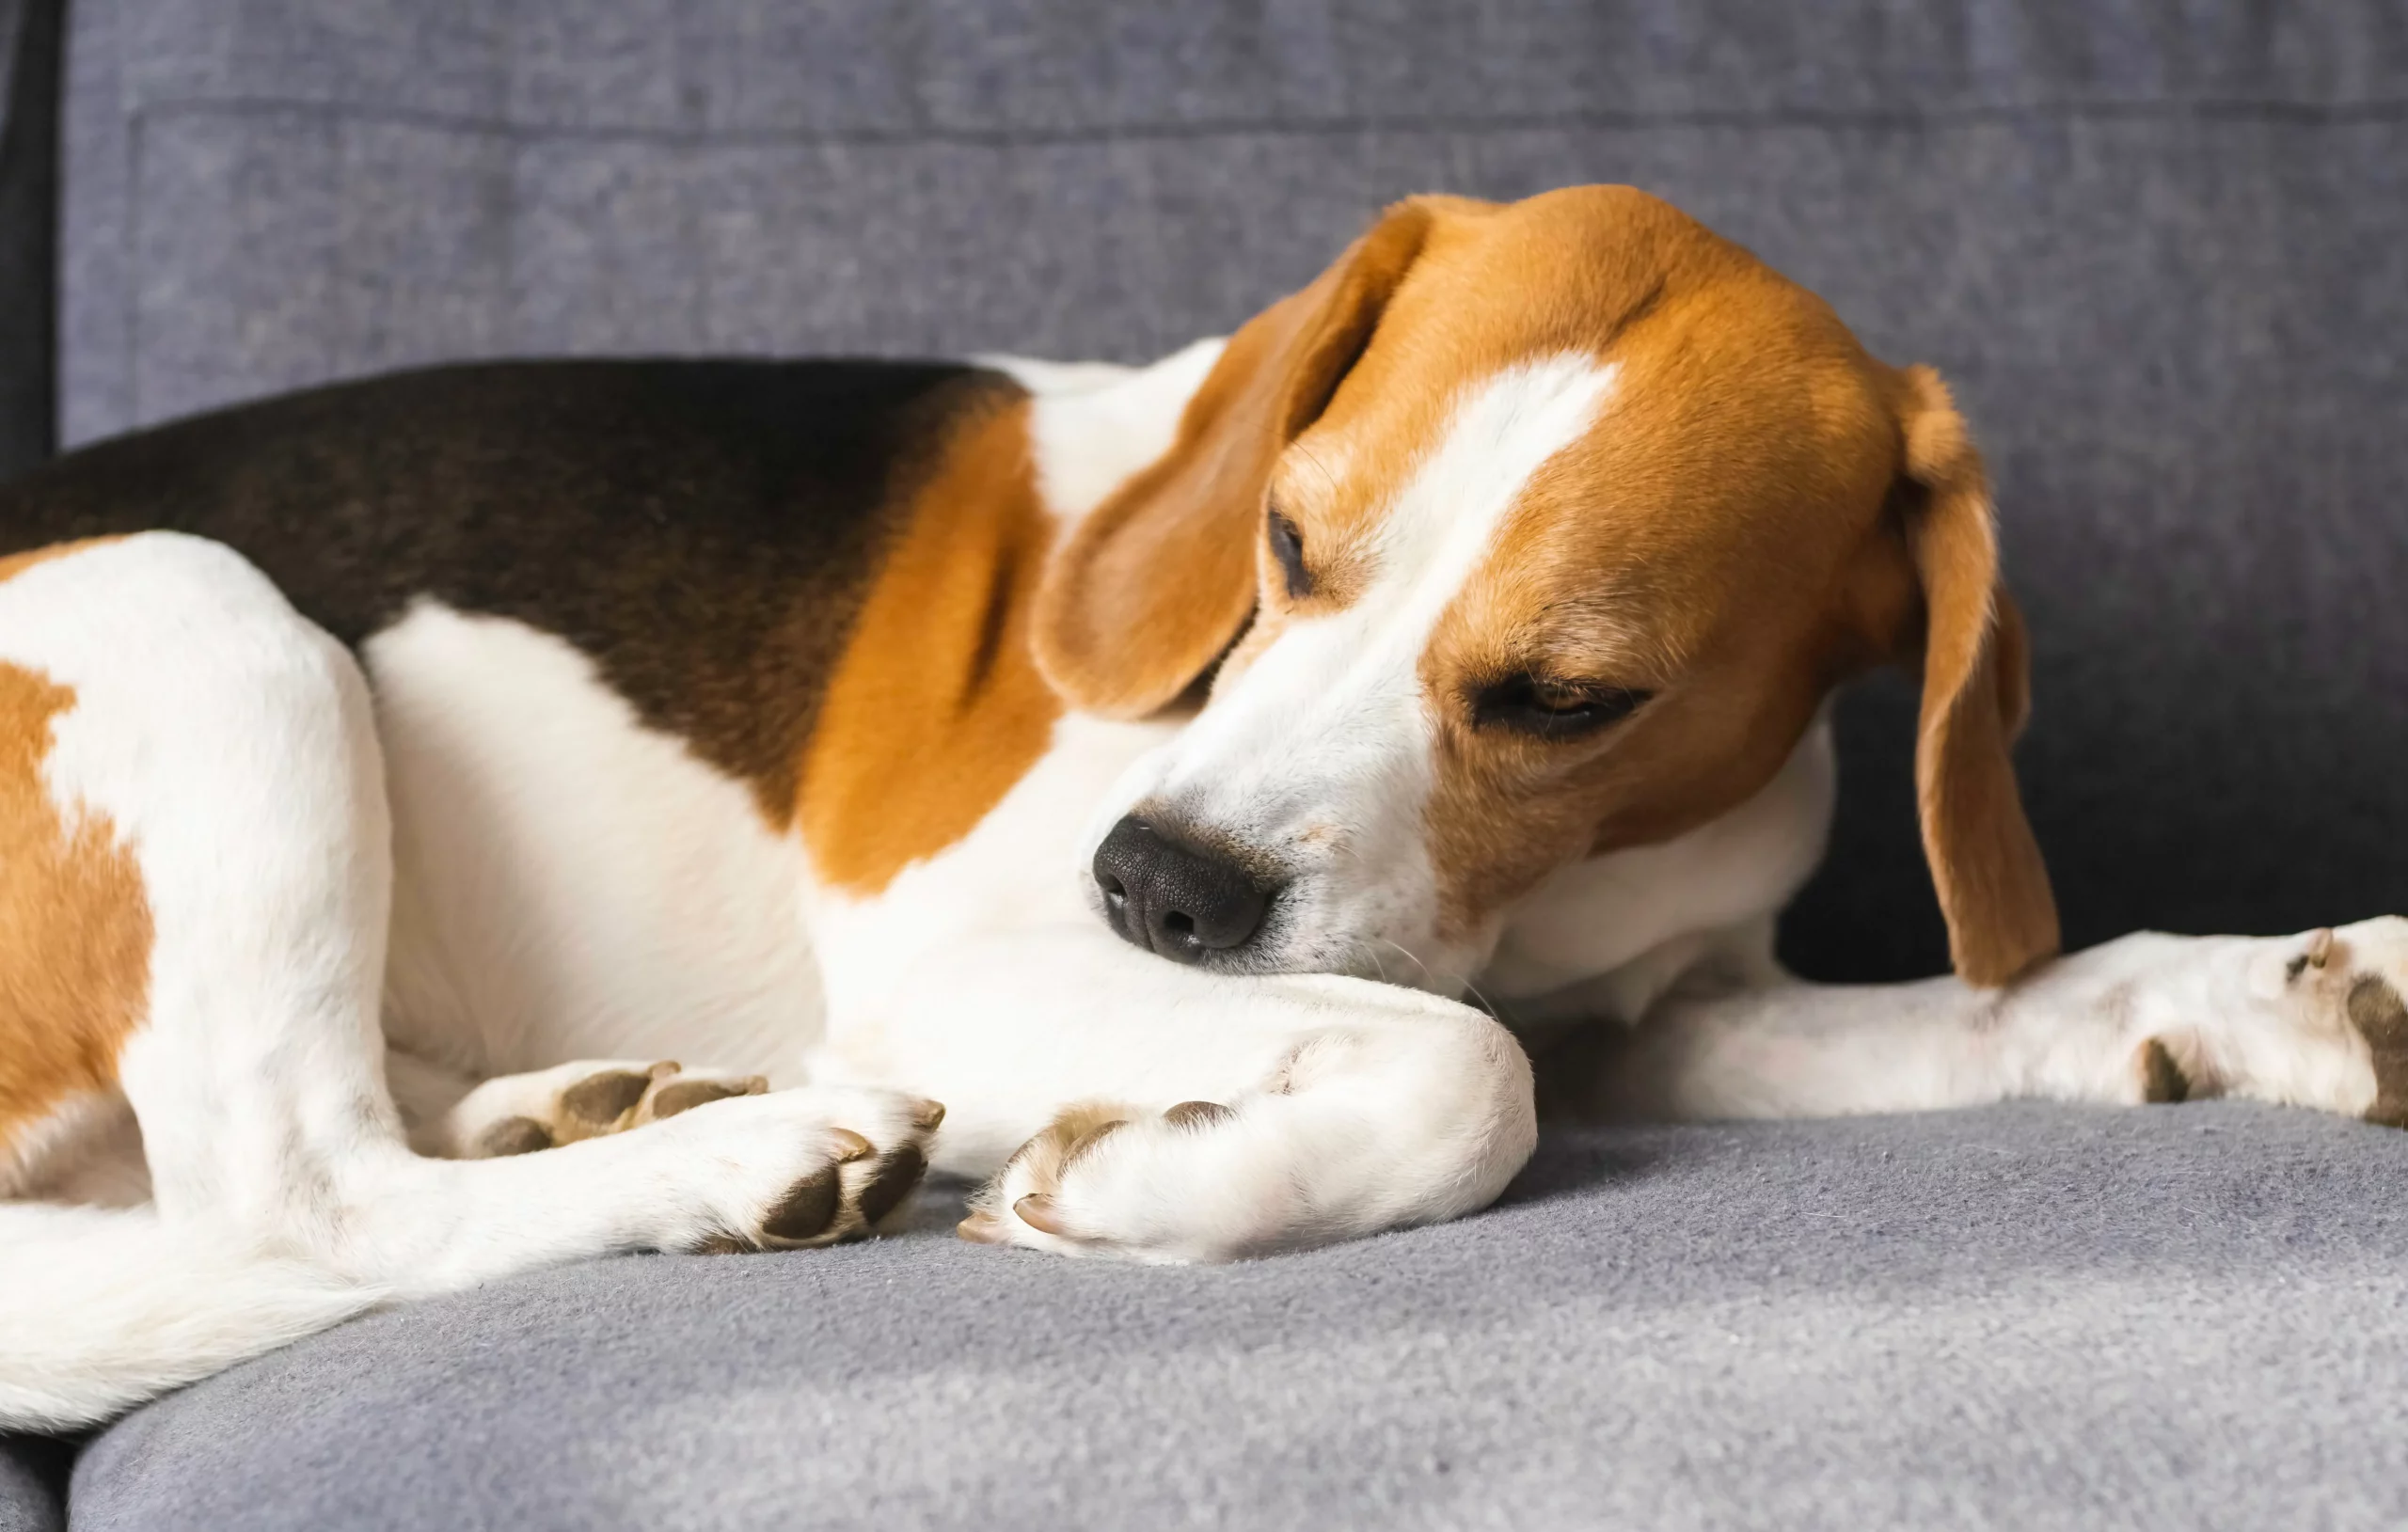 Skin Rash on Dogs: Guard Your Pup With These 3 Easy Steps